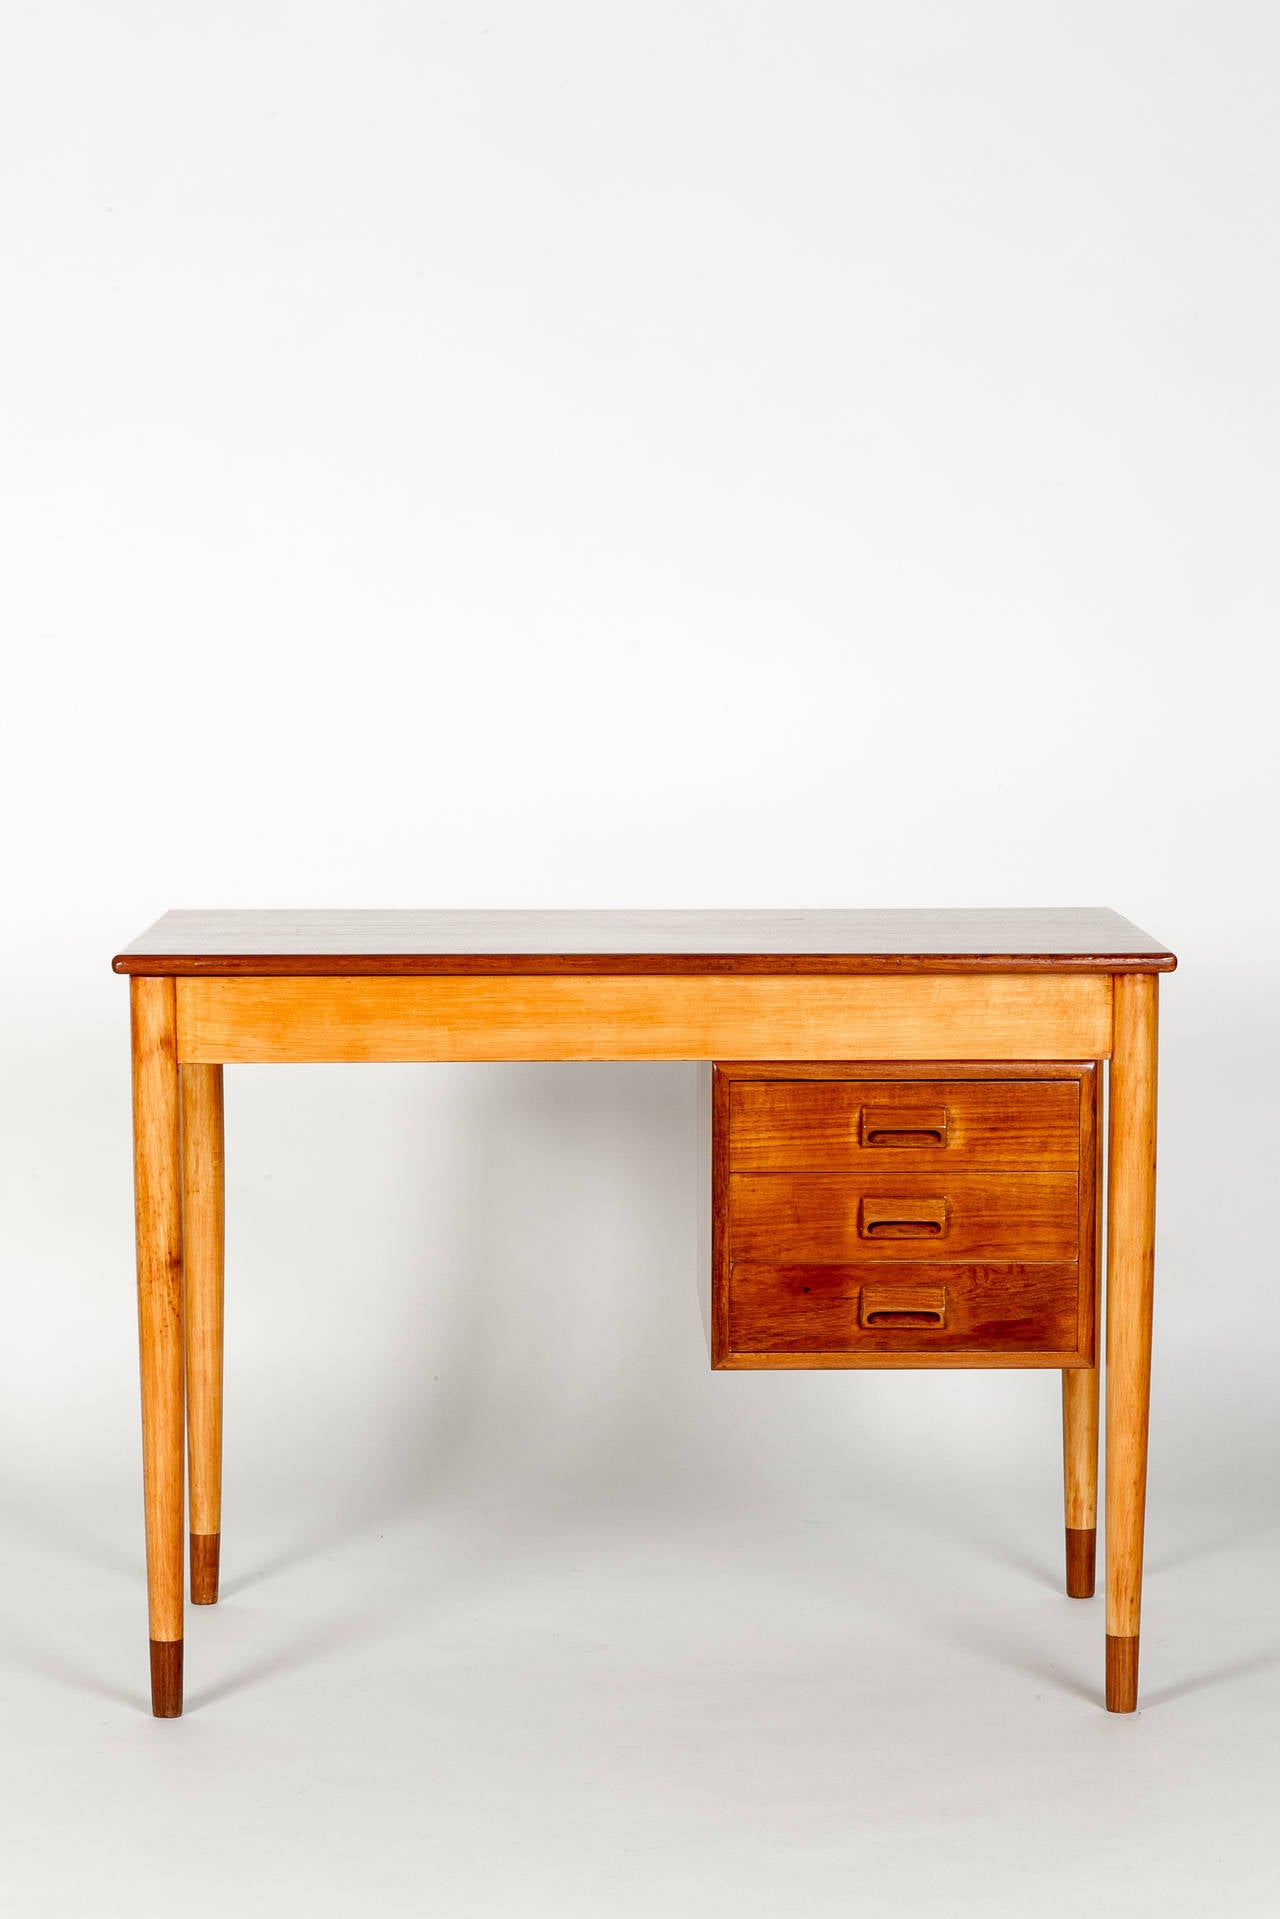 Incredibly rare Borge Mogensen desk, model 131 for Soborg Mobelfabrik in Denmark! This stunning version is made of teak and beech wood and was designed in 1952 and manufactured in the early 1950s! It's a masterpiece of modern design and shows